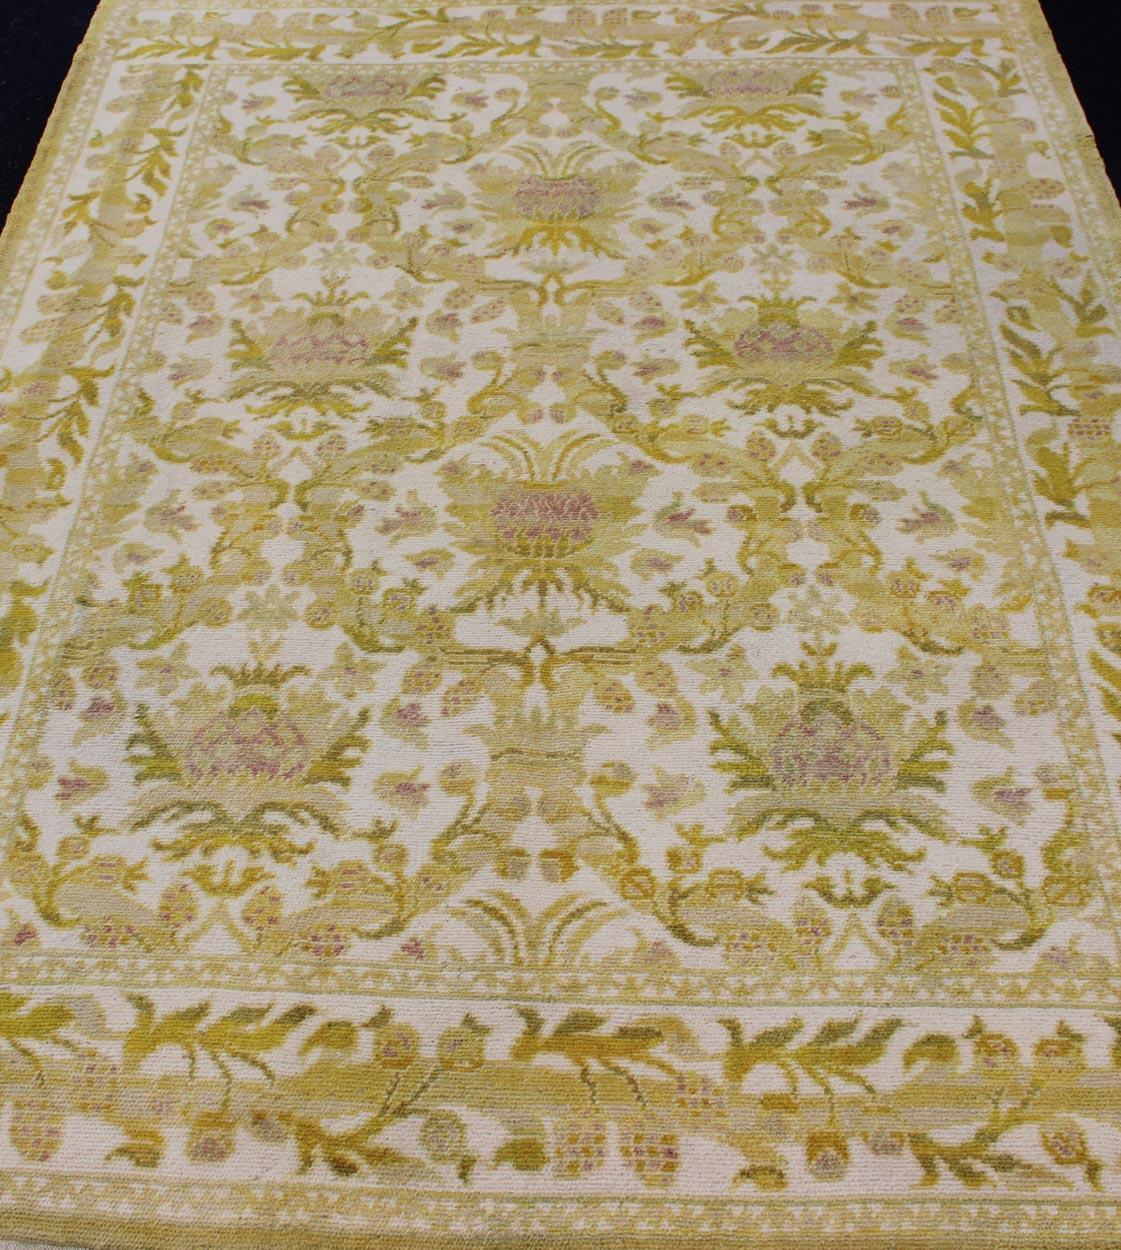 Elegant Spanish Rug with Floral Design in Golden-Green, Acid Green and White In Excellent Condition For Sale In Atlanta, GA